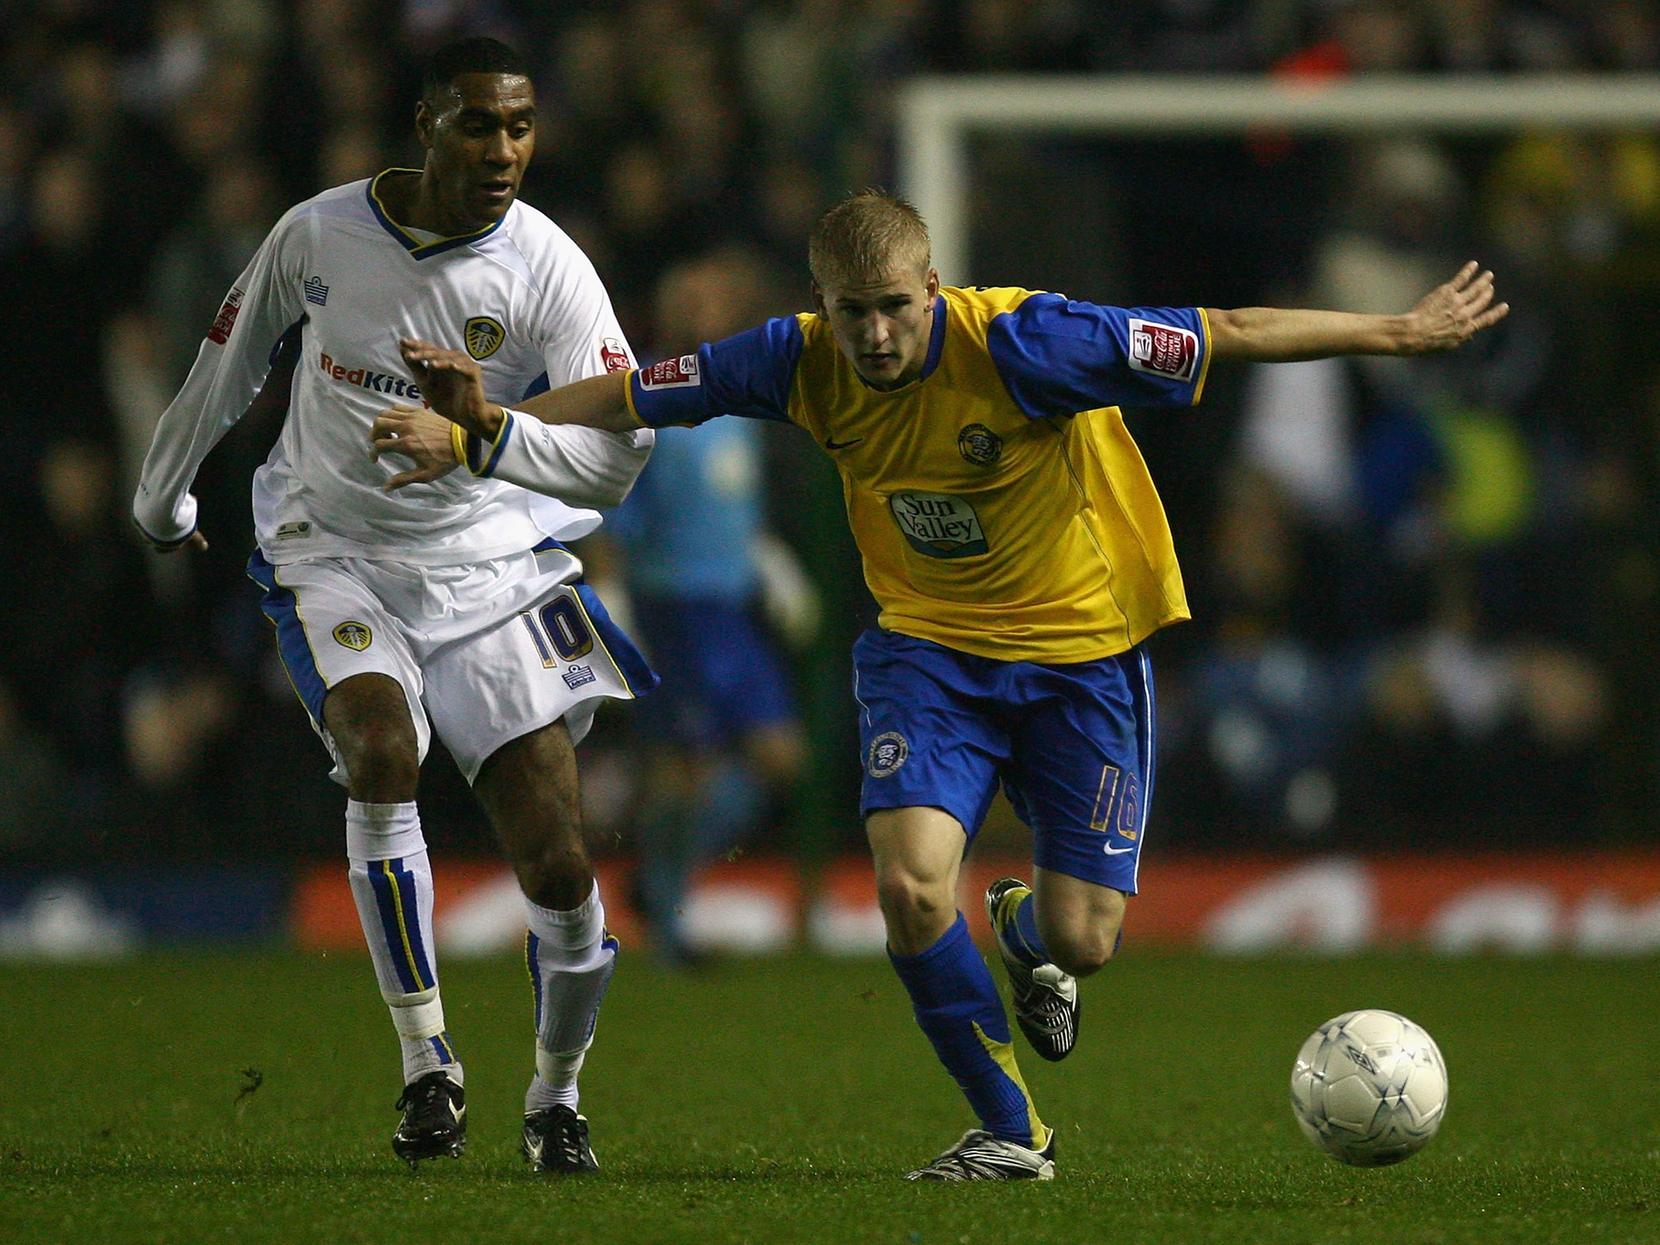 Leeds United, now a third-tier side, exited the Cup in the first round proper after suffering a surprise 10 home defeat to Hereford United in the replay that followed a goalless draw.